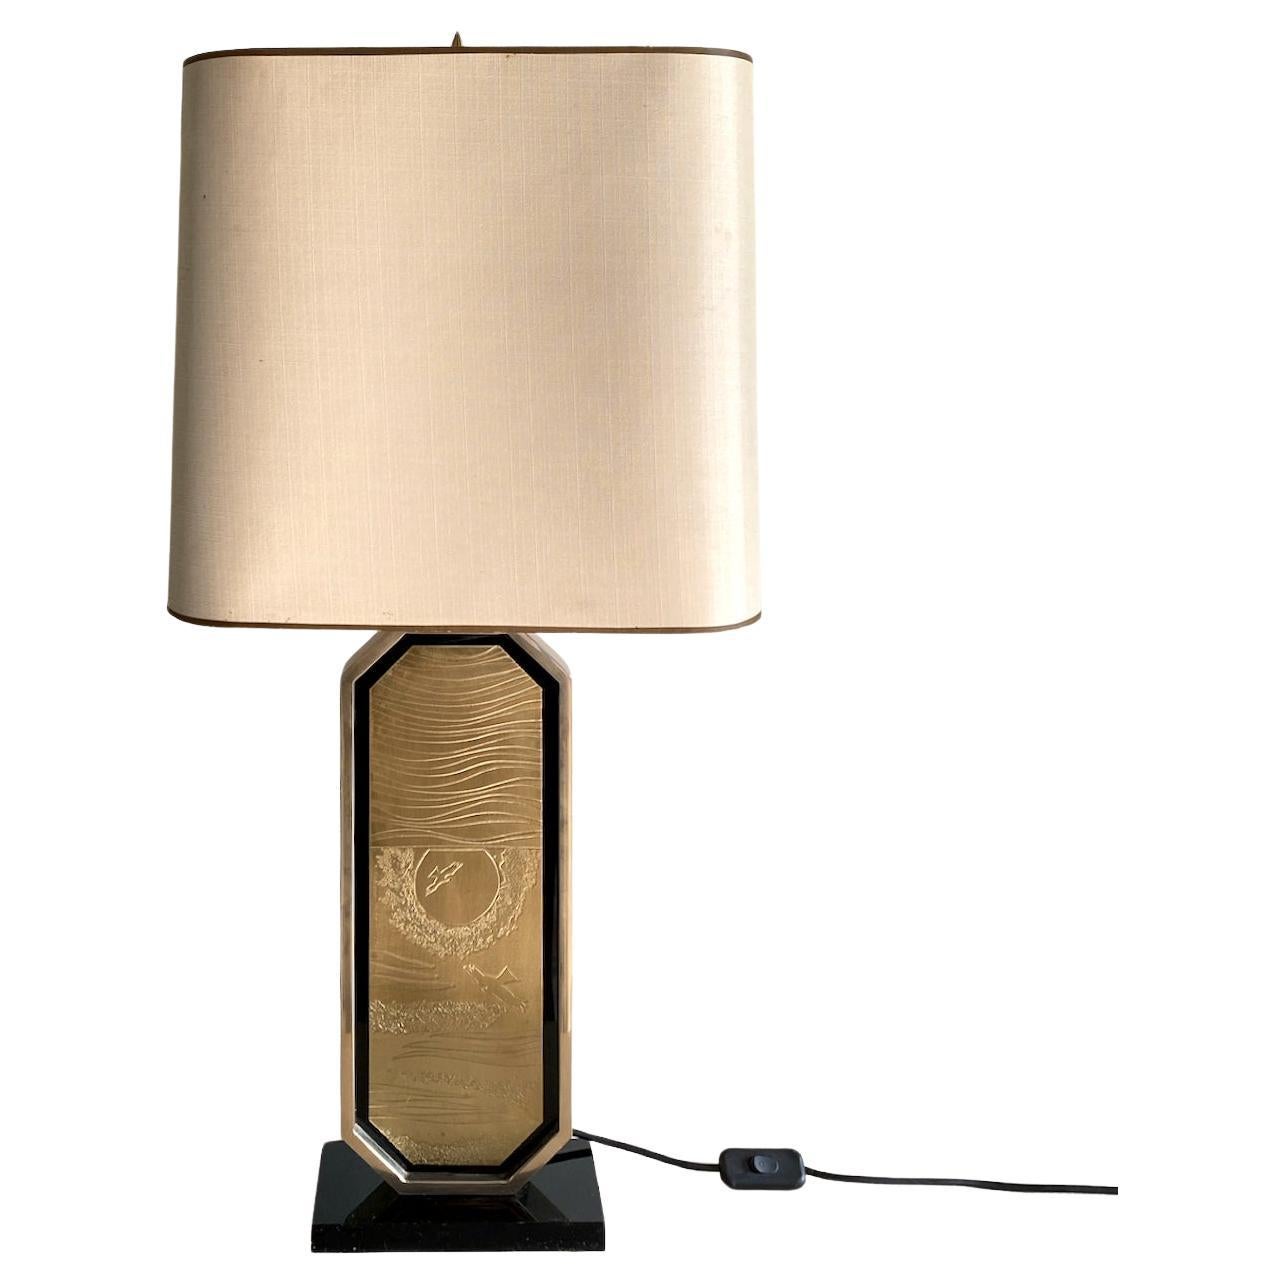 George Mathias 23kt gold plated table lamp 1970's